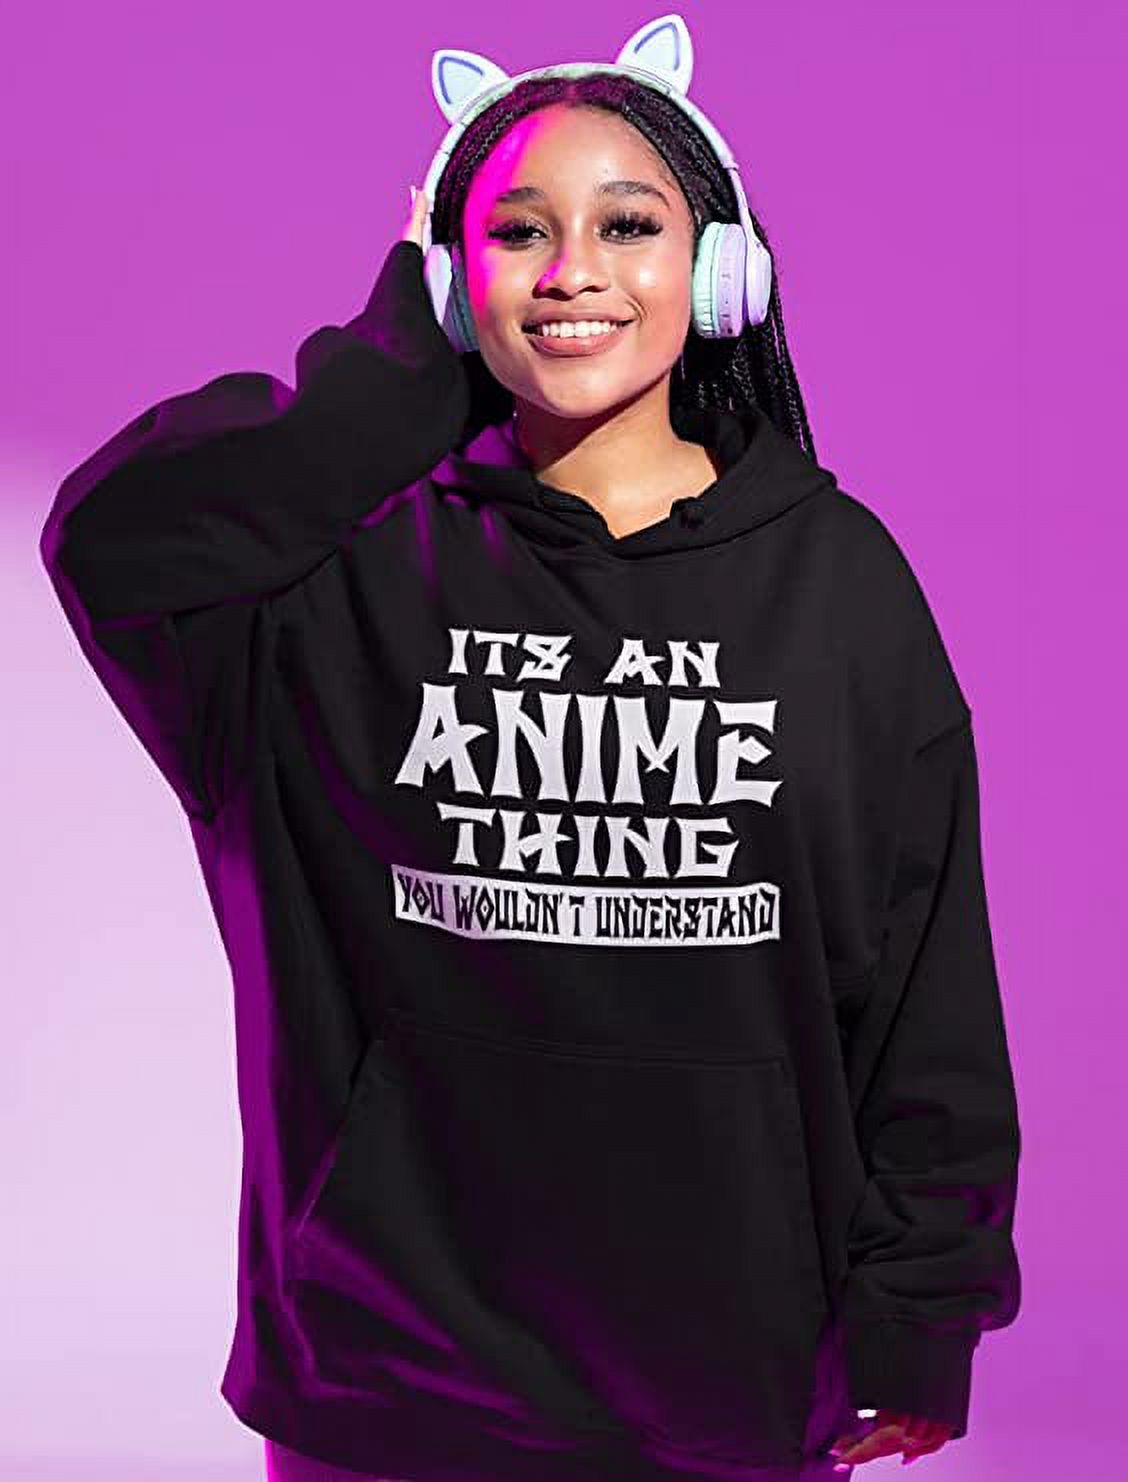 Tstars Men's Anime Lover Graphic Hoodie - It's an Anime Thing You Wouldn't Understand Design - Ideal for Anime Enthusiasts - image 5 of 8